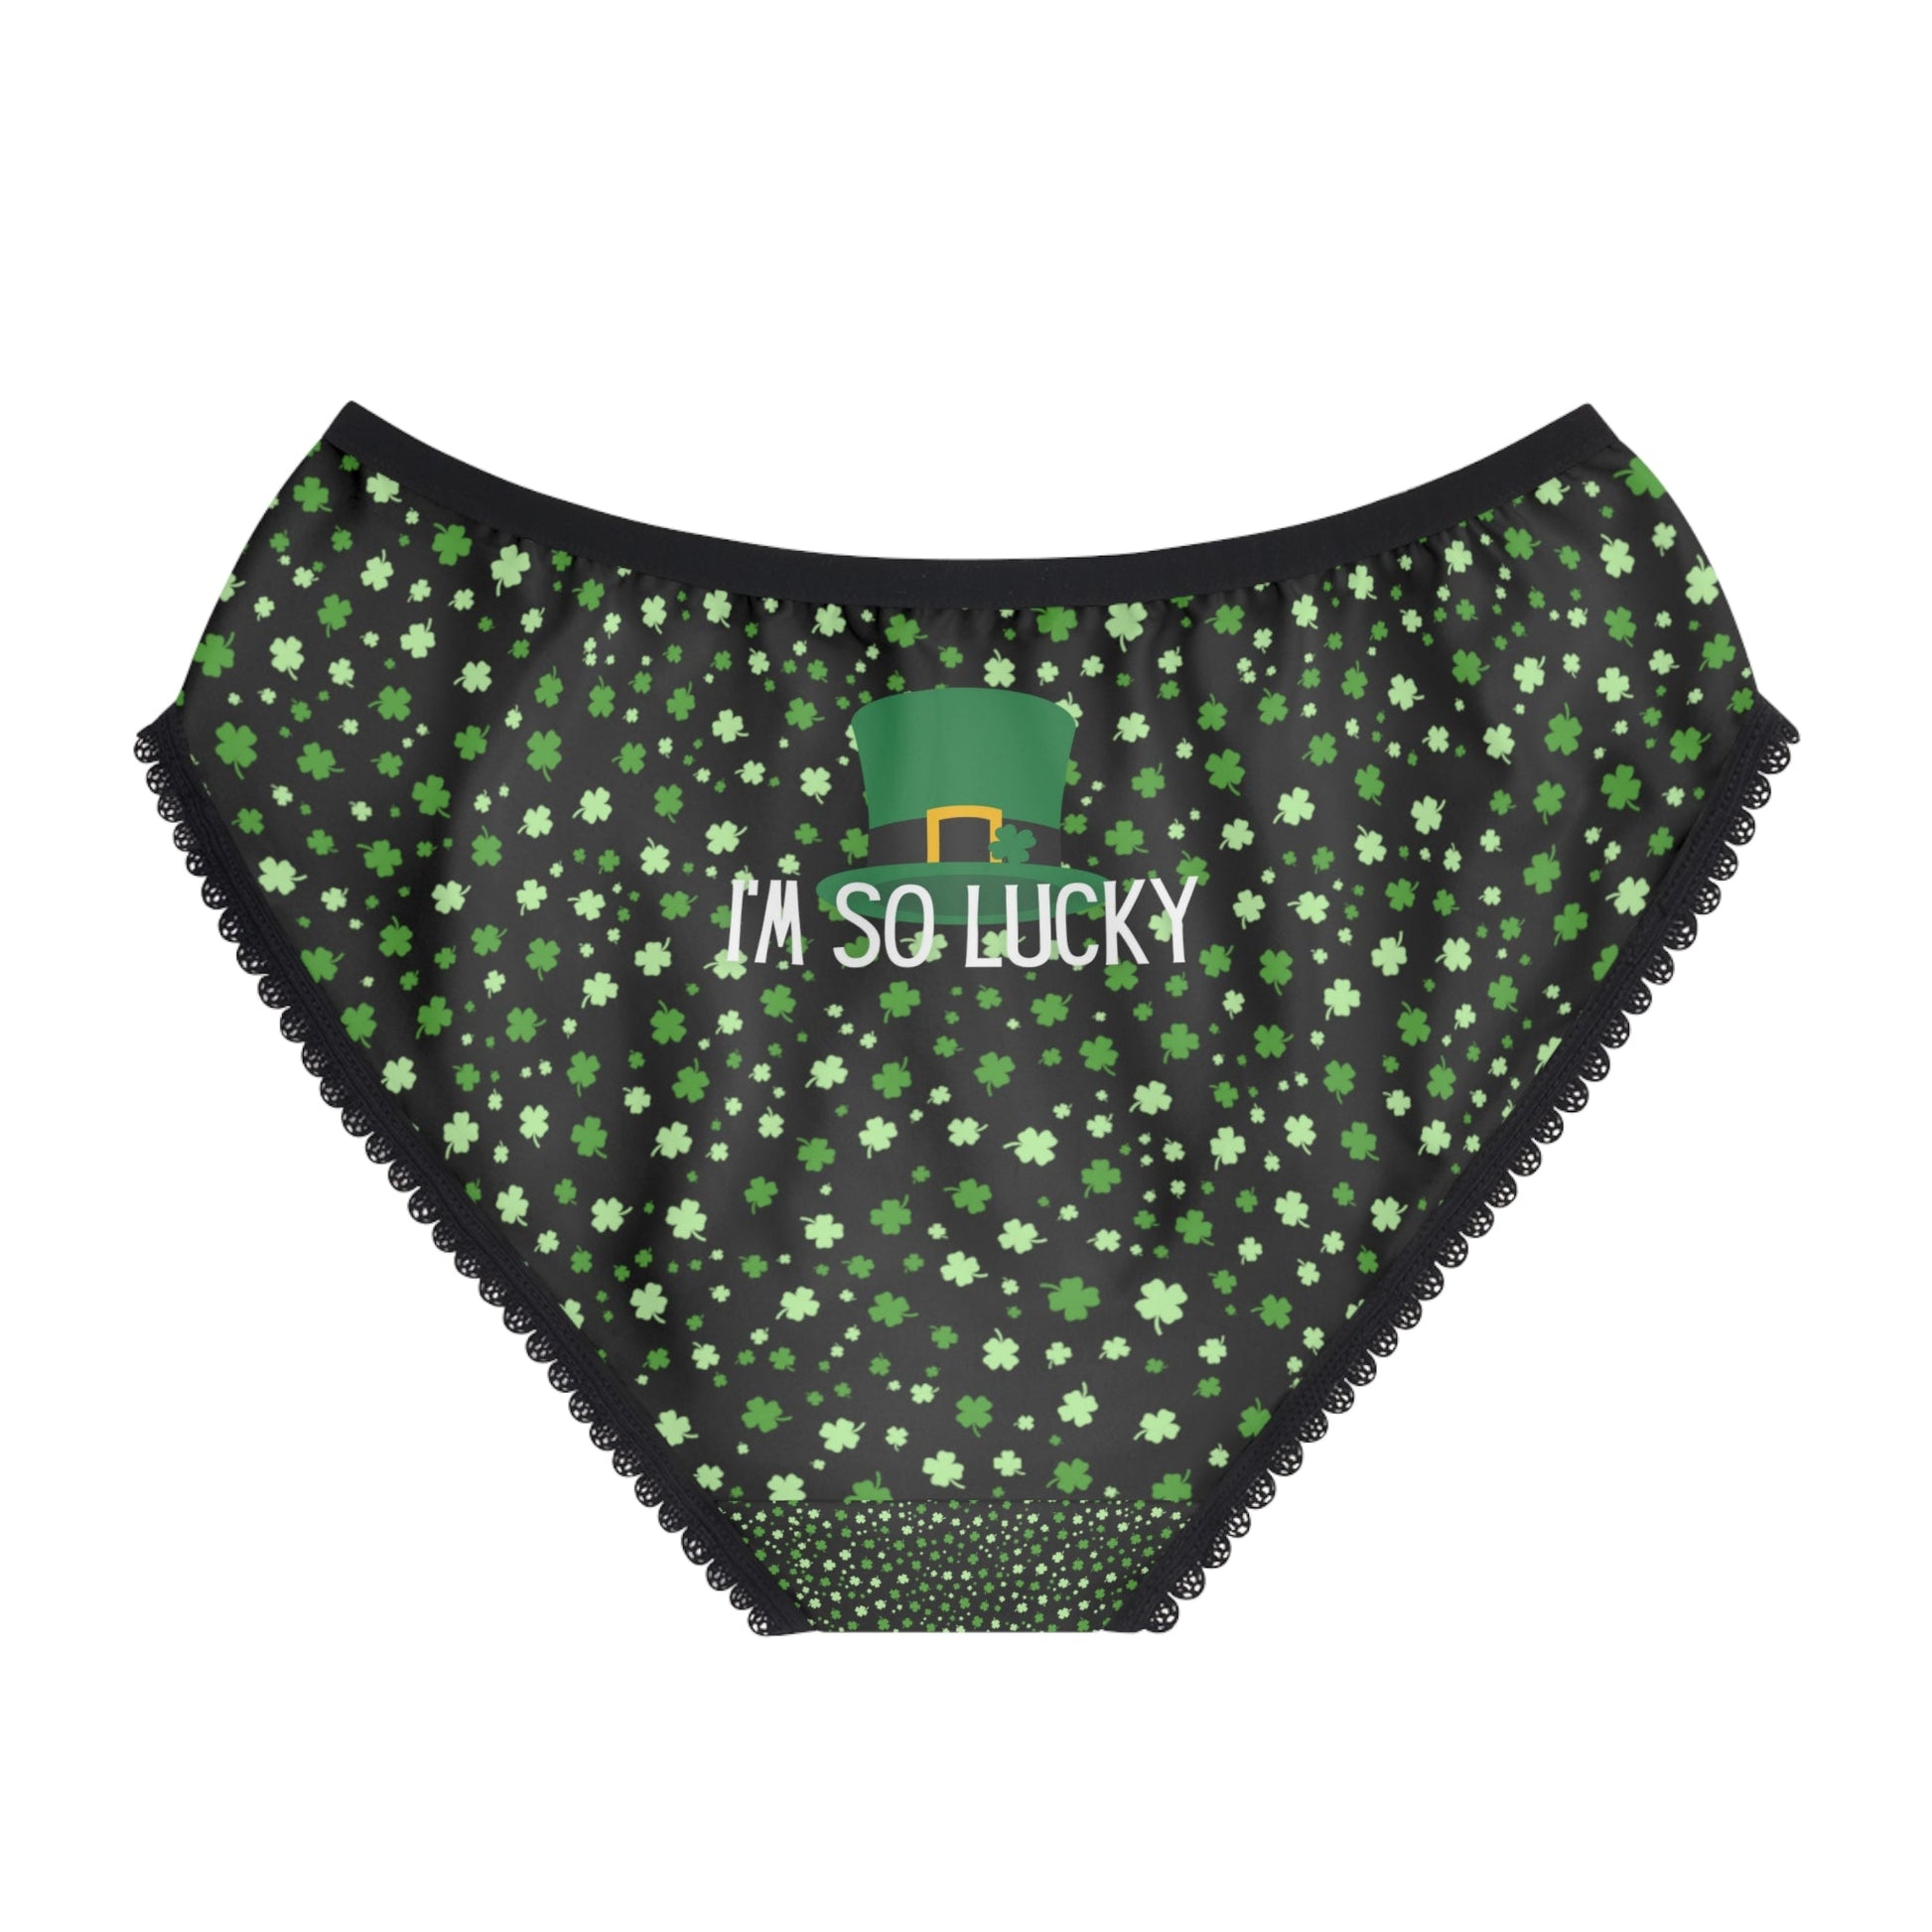 I’m So Lucky Undies - XS / Black stitching All Over Prints